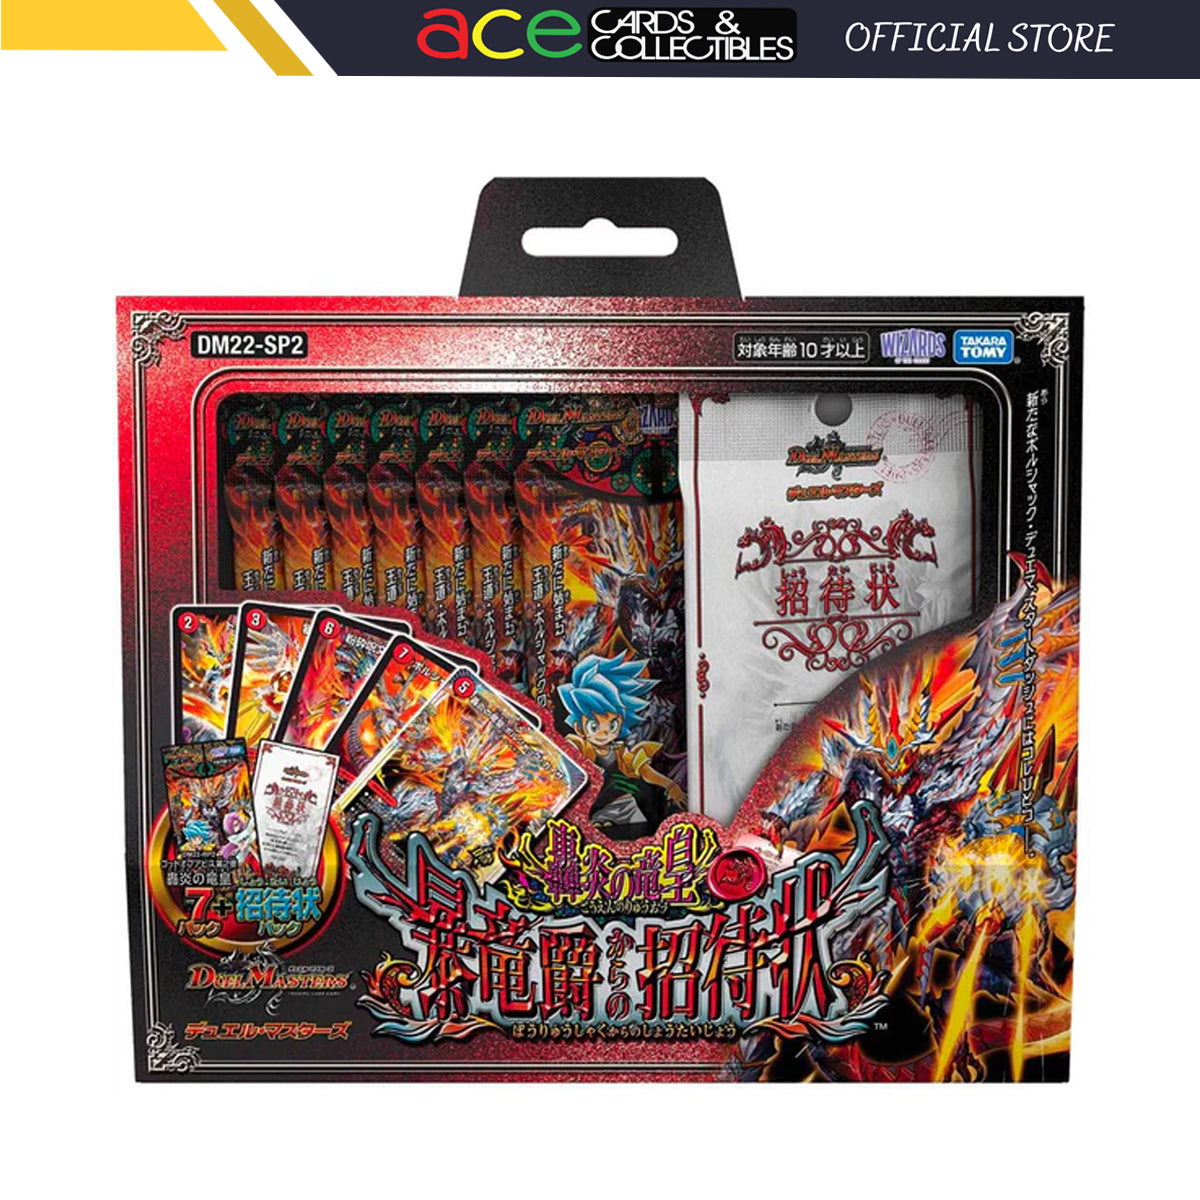 Duel Masters TCG &quot;Dragon Emperor of Roaring Flame&quot; Invitation from the Raging Dragon Count [DM22-SP2] (Japanese)-Takara Tomy-Ace Cards &amp; Collectibles